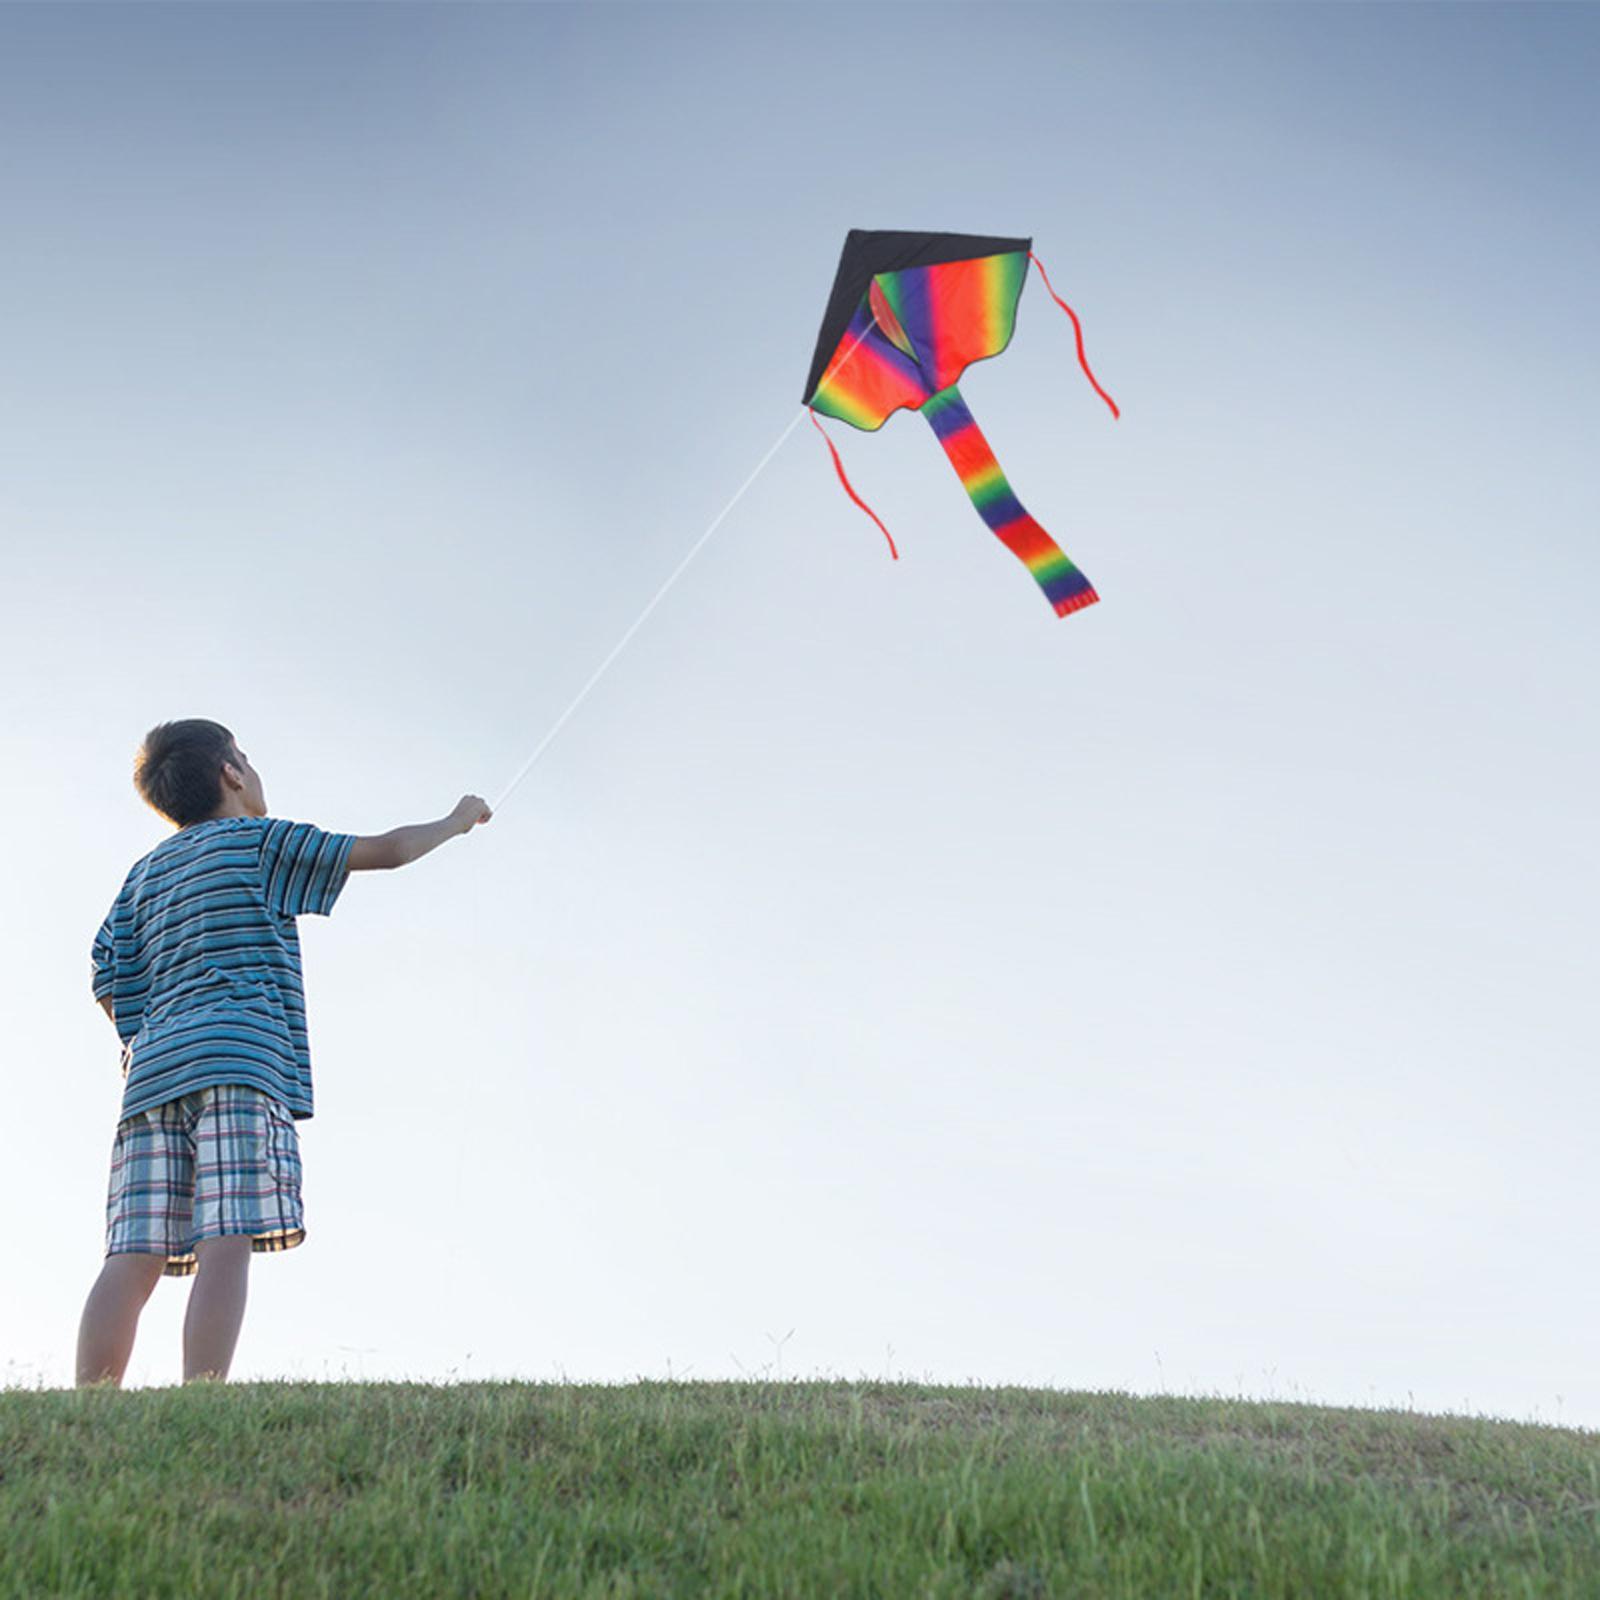 Giant Delta Kites Fly Kite Huge 1 Width Easy to Fly for Outdoor Toys Beach